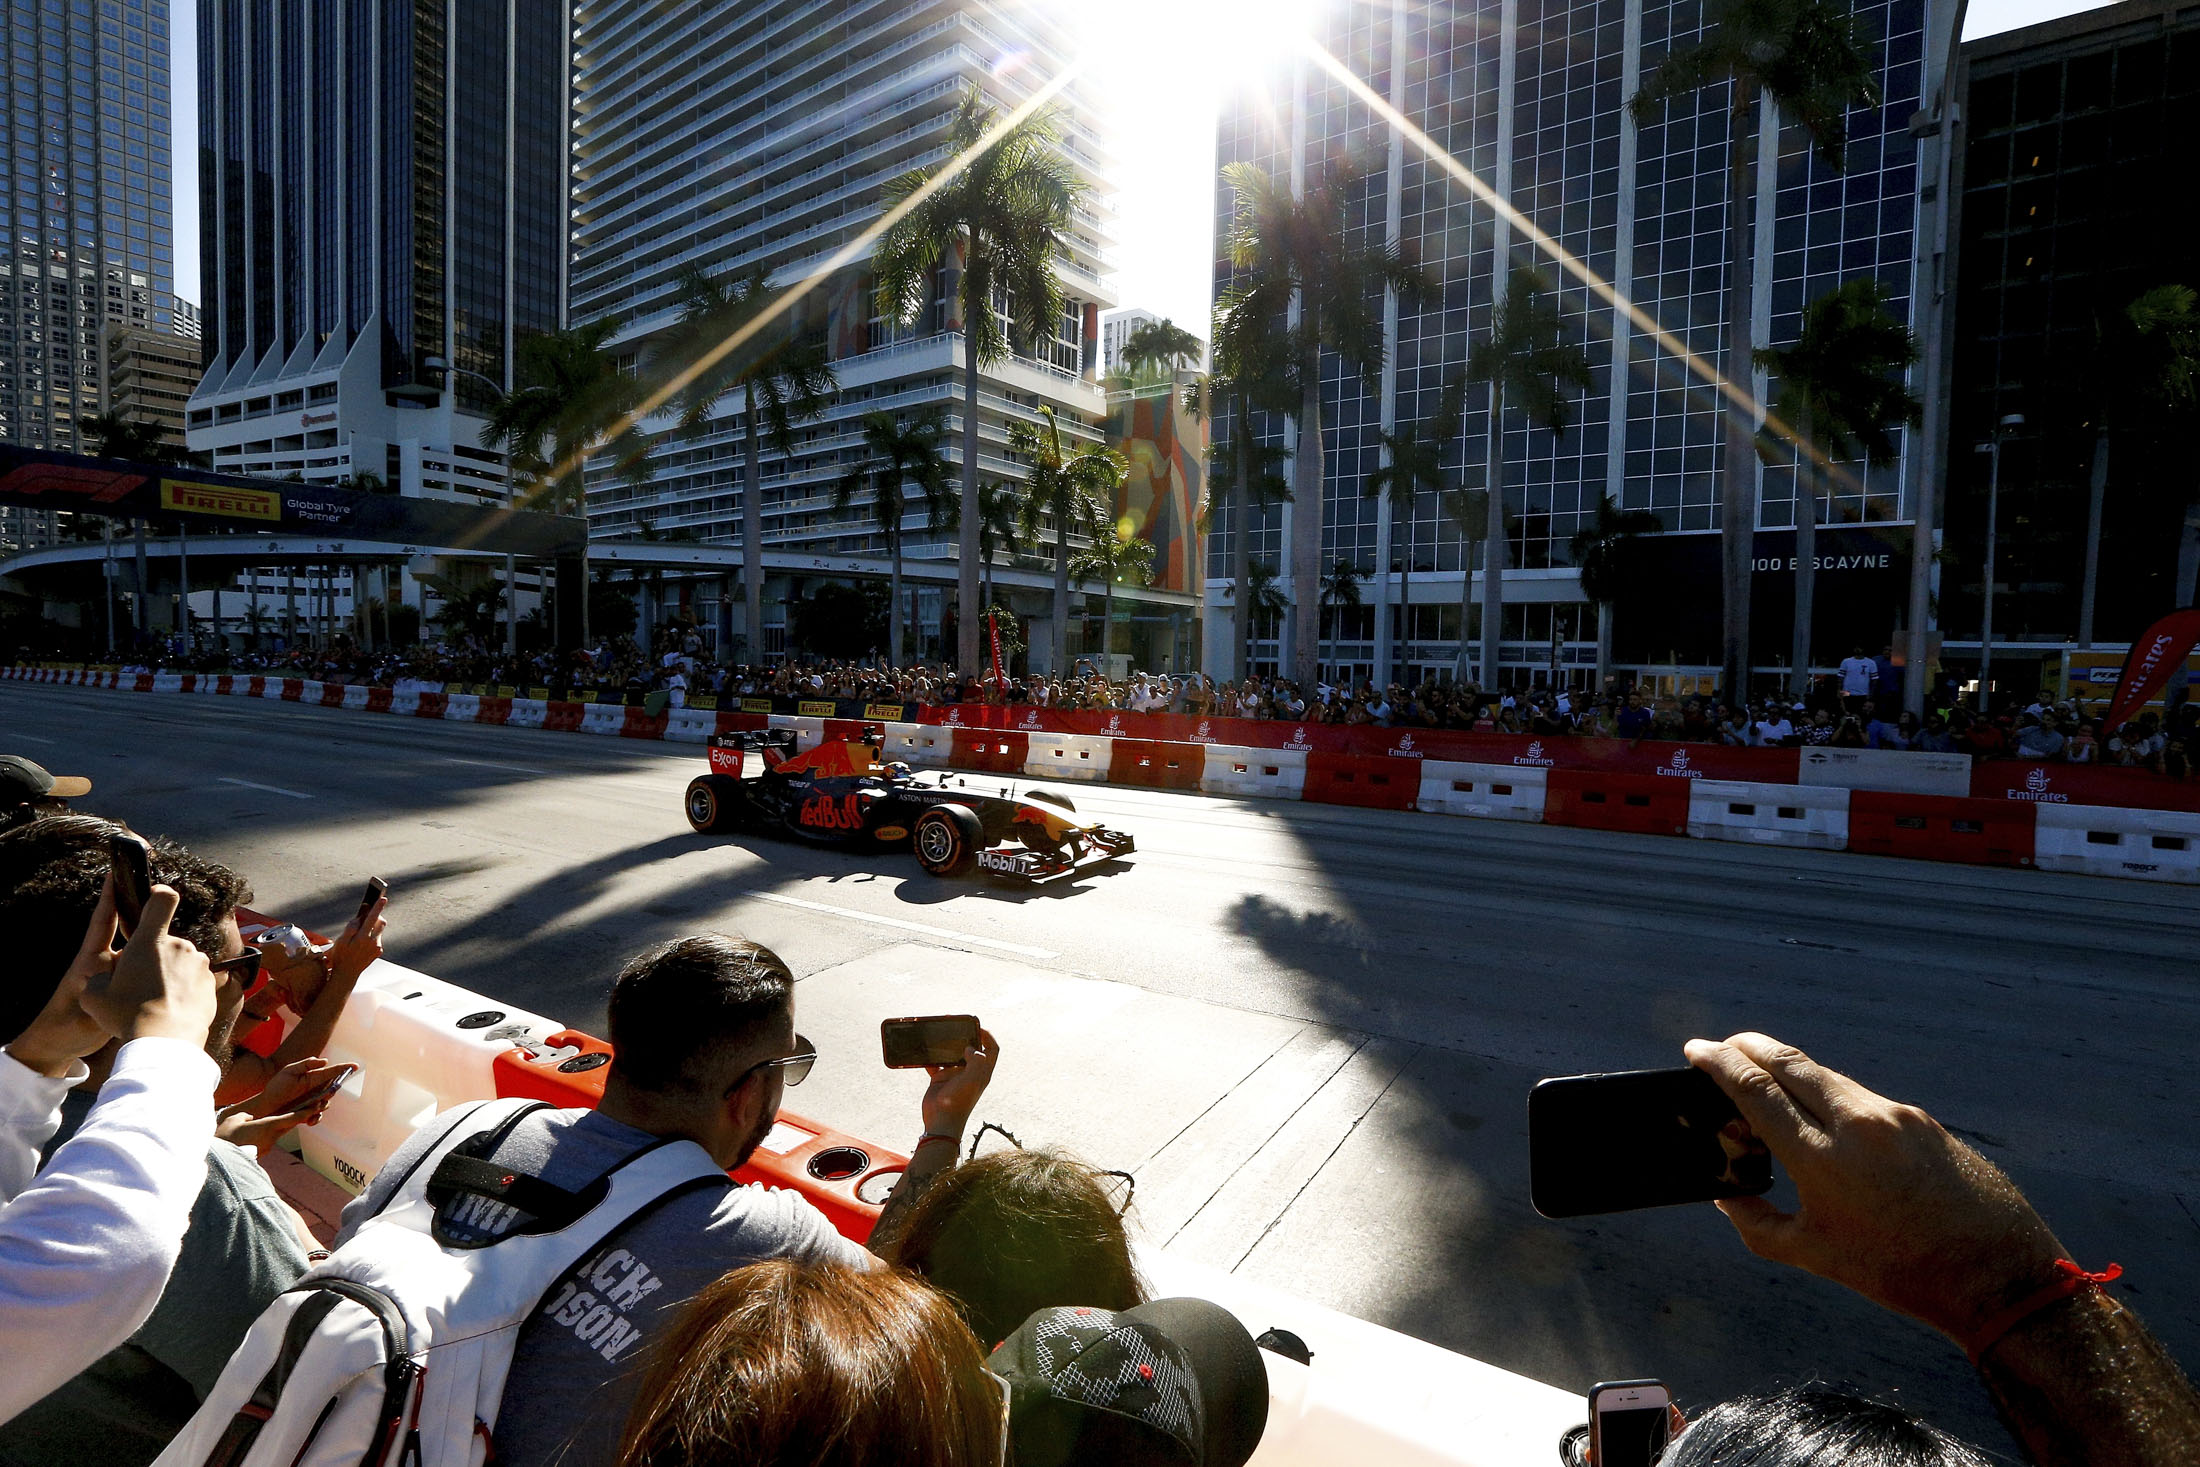 Patrick Friesacher drives&nbsp;the Red Bull car on an exhibition run during last year’s&nbsp;F1 Festival at Bayfront Park&nbsp;in Miami, Florida.